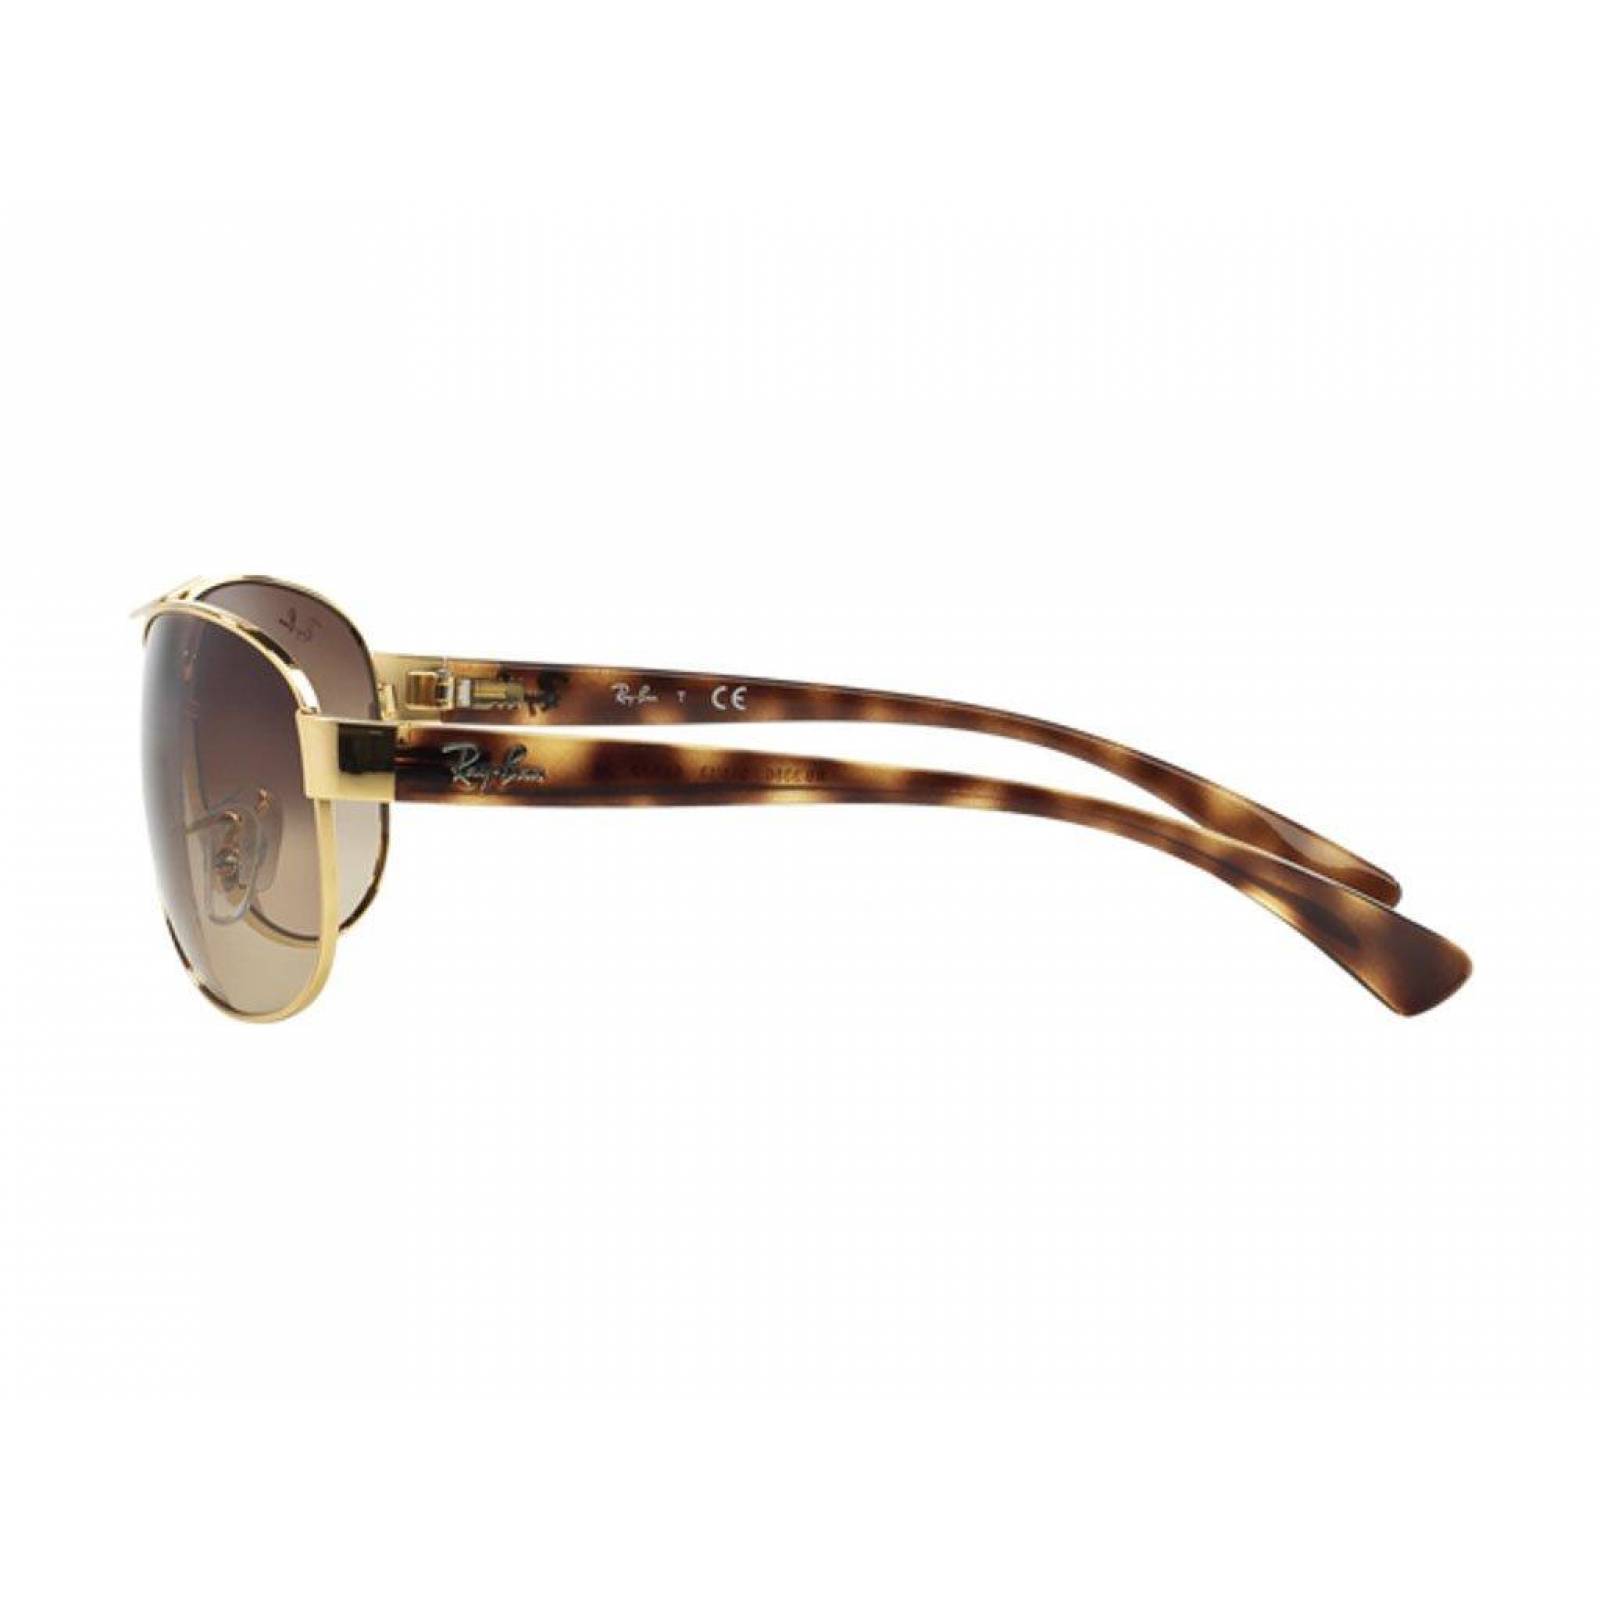 Lentes Ray-Ban RB 3386 001/13 63 Gold Tortoise / Brown Gradient 